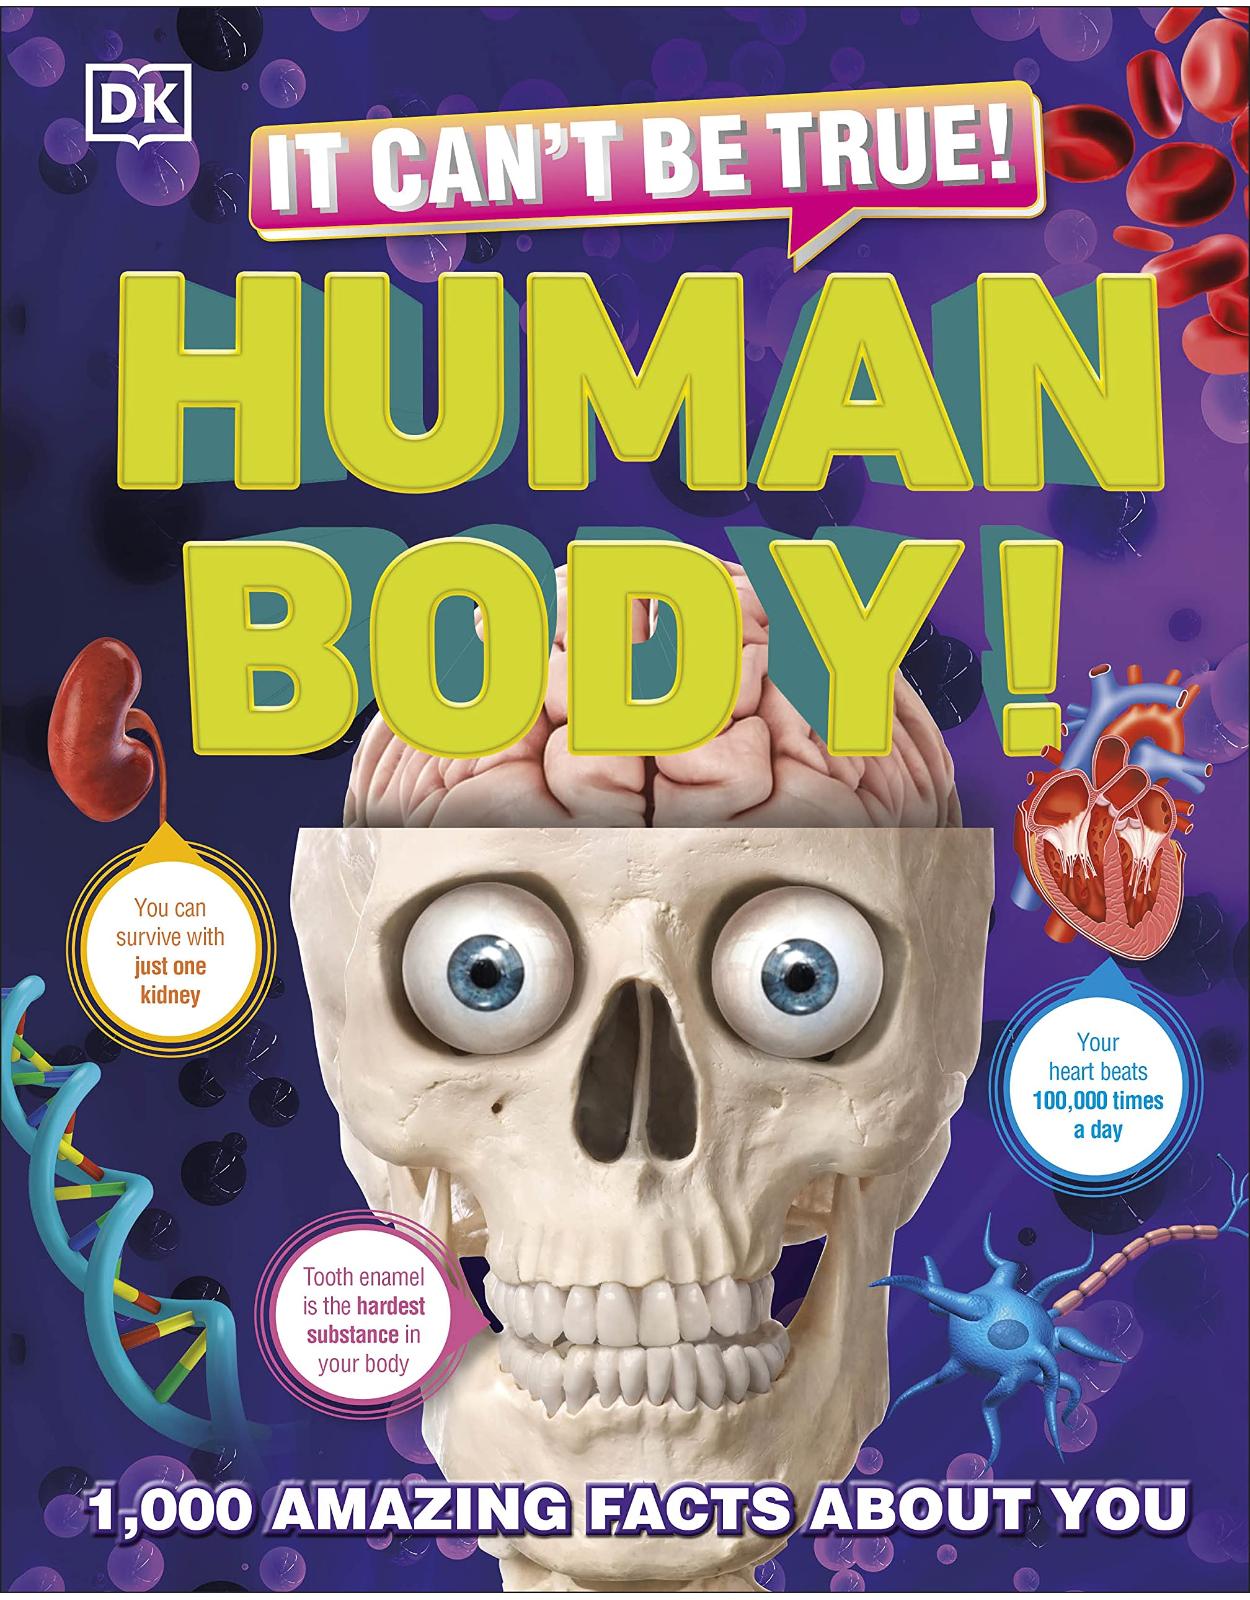 It Can’t Be True! Human Body!: 1,000 Amazing Facts About You